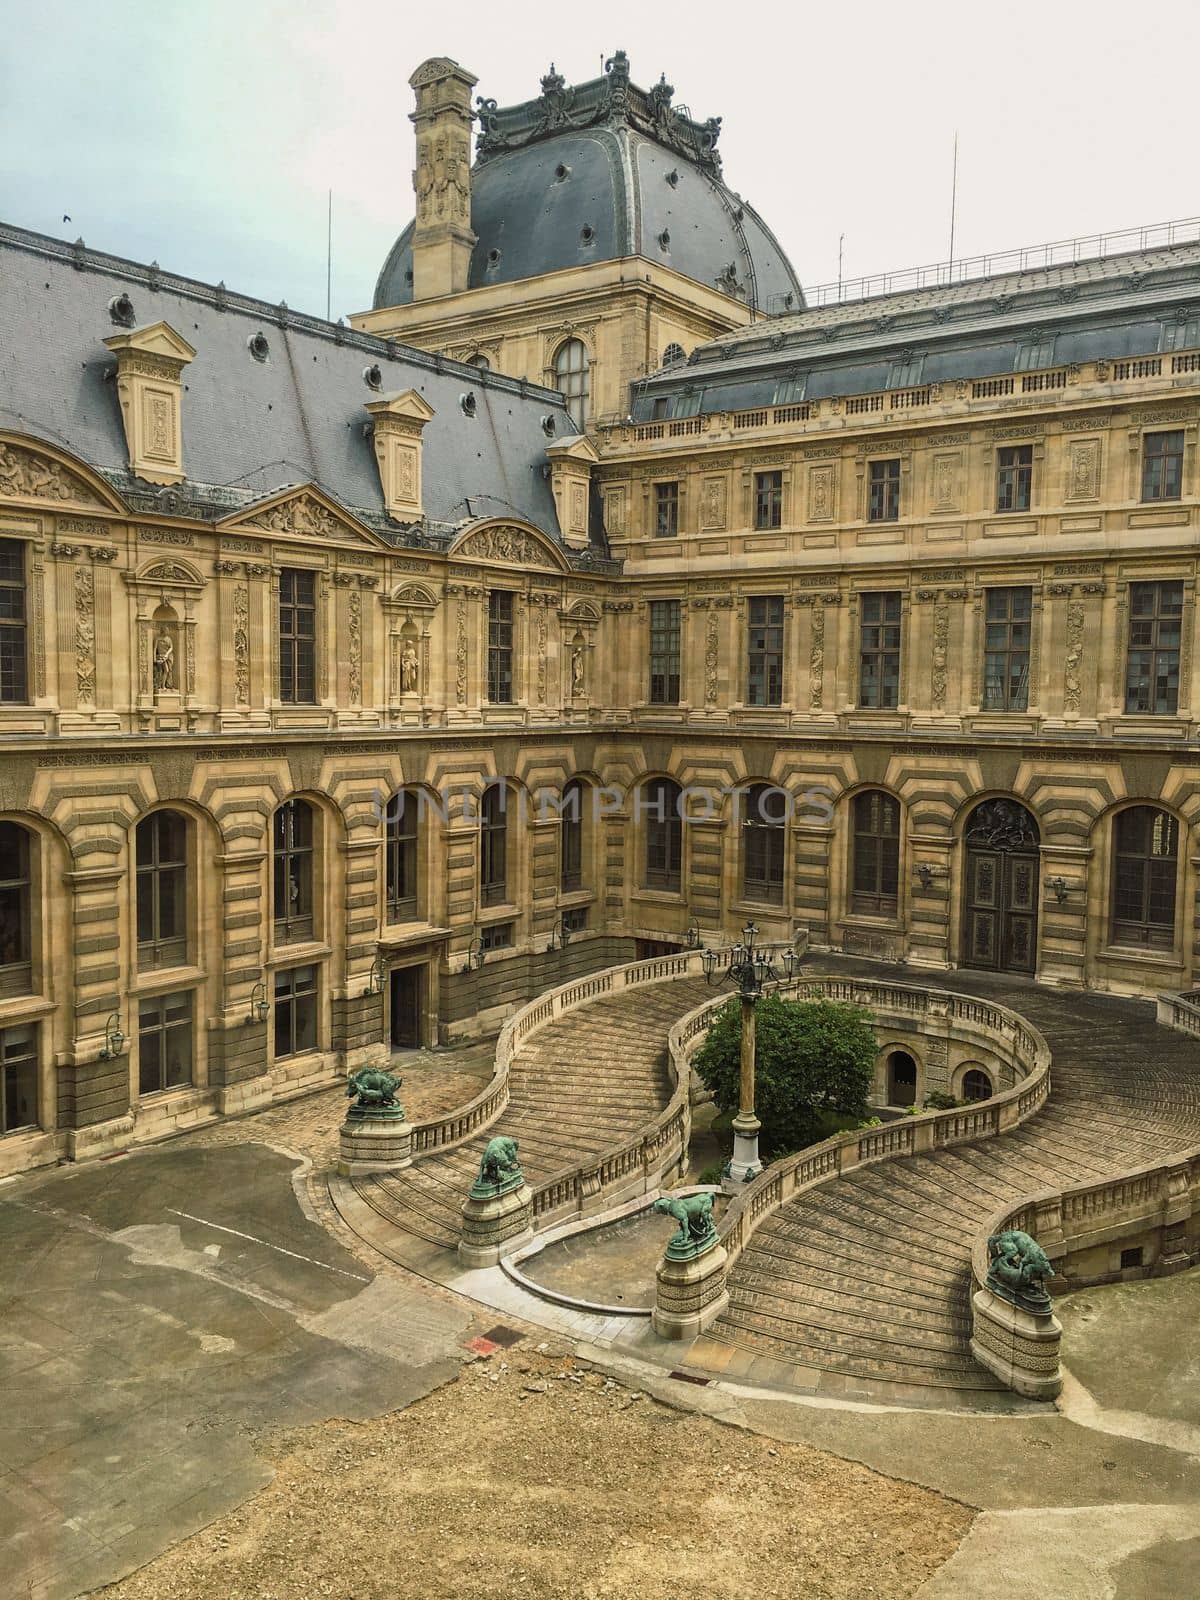 View from the outside of the Louvre in Paris by WeWander